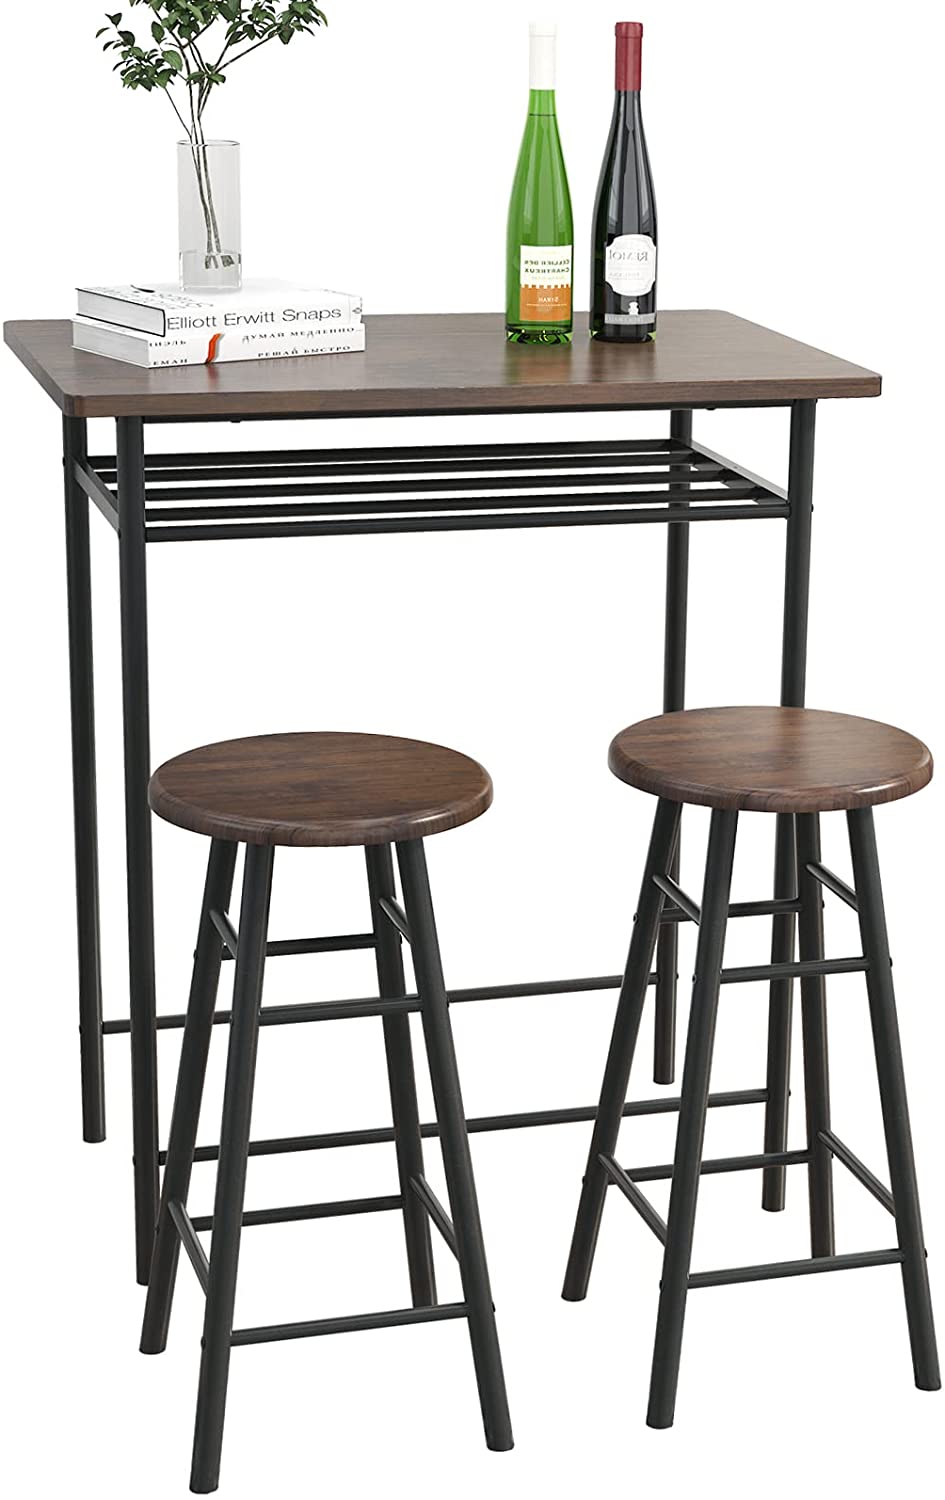 SogesPower Pub Dining Height Table Set, Modern Kitchen Counter Dining Set, Bar Table with 2 Bar Stools for Kitchen, Living Room, Brown